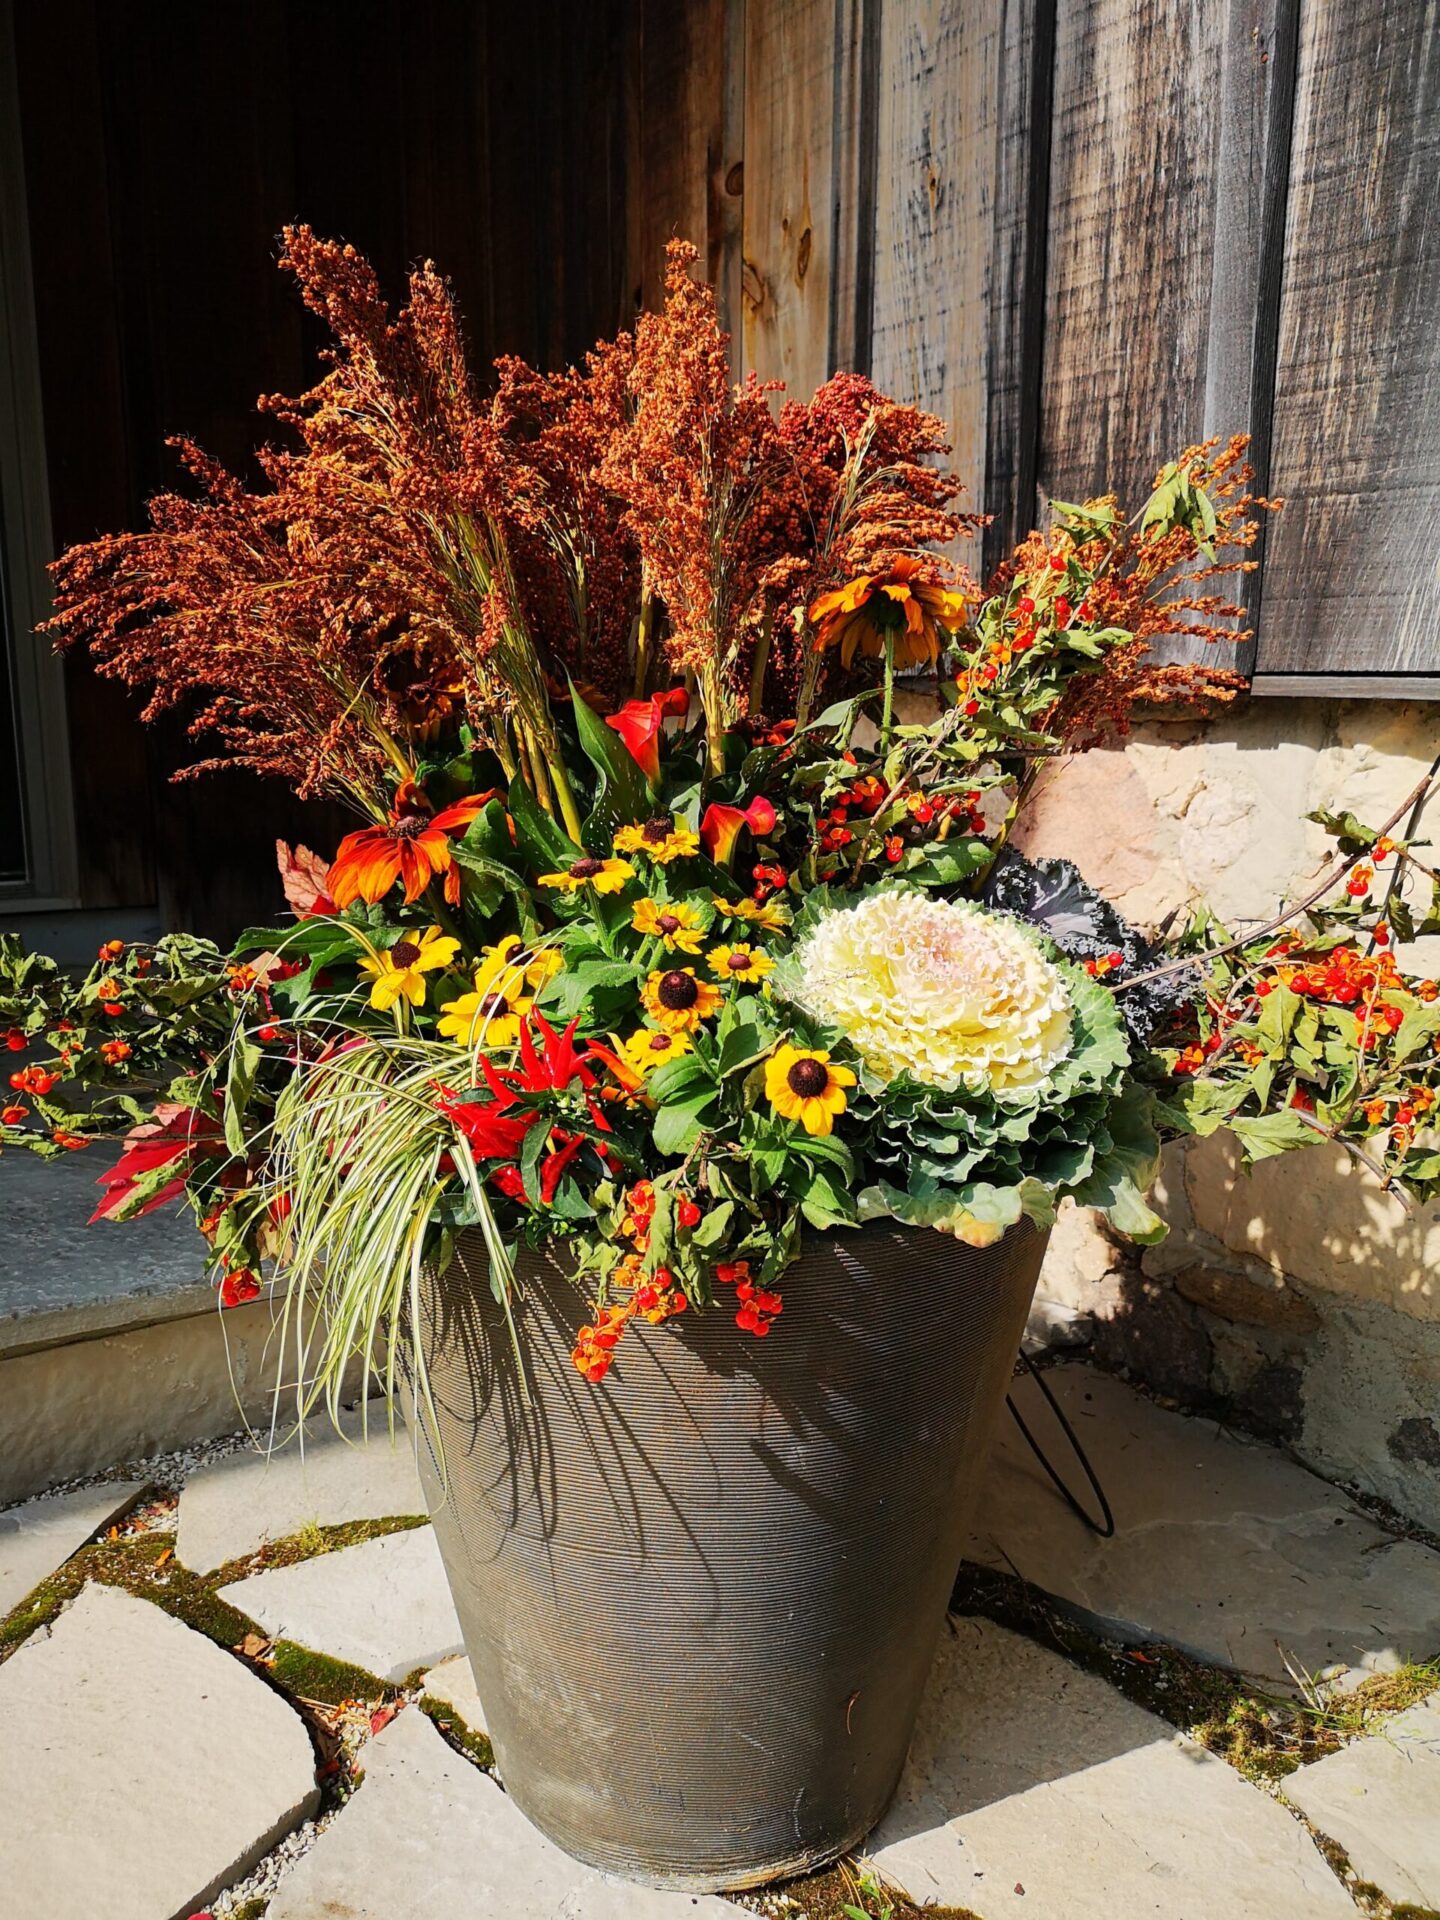 A large flower arrangement in a textured pot with red, yellow, and green plants, ornamental cabbage, and tall grasses, located on a paved surface by a wooden wall.